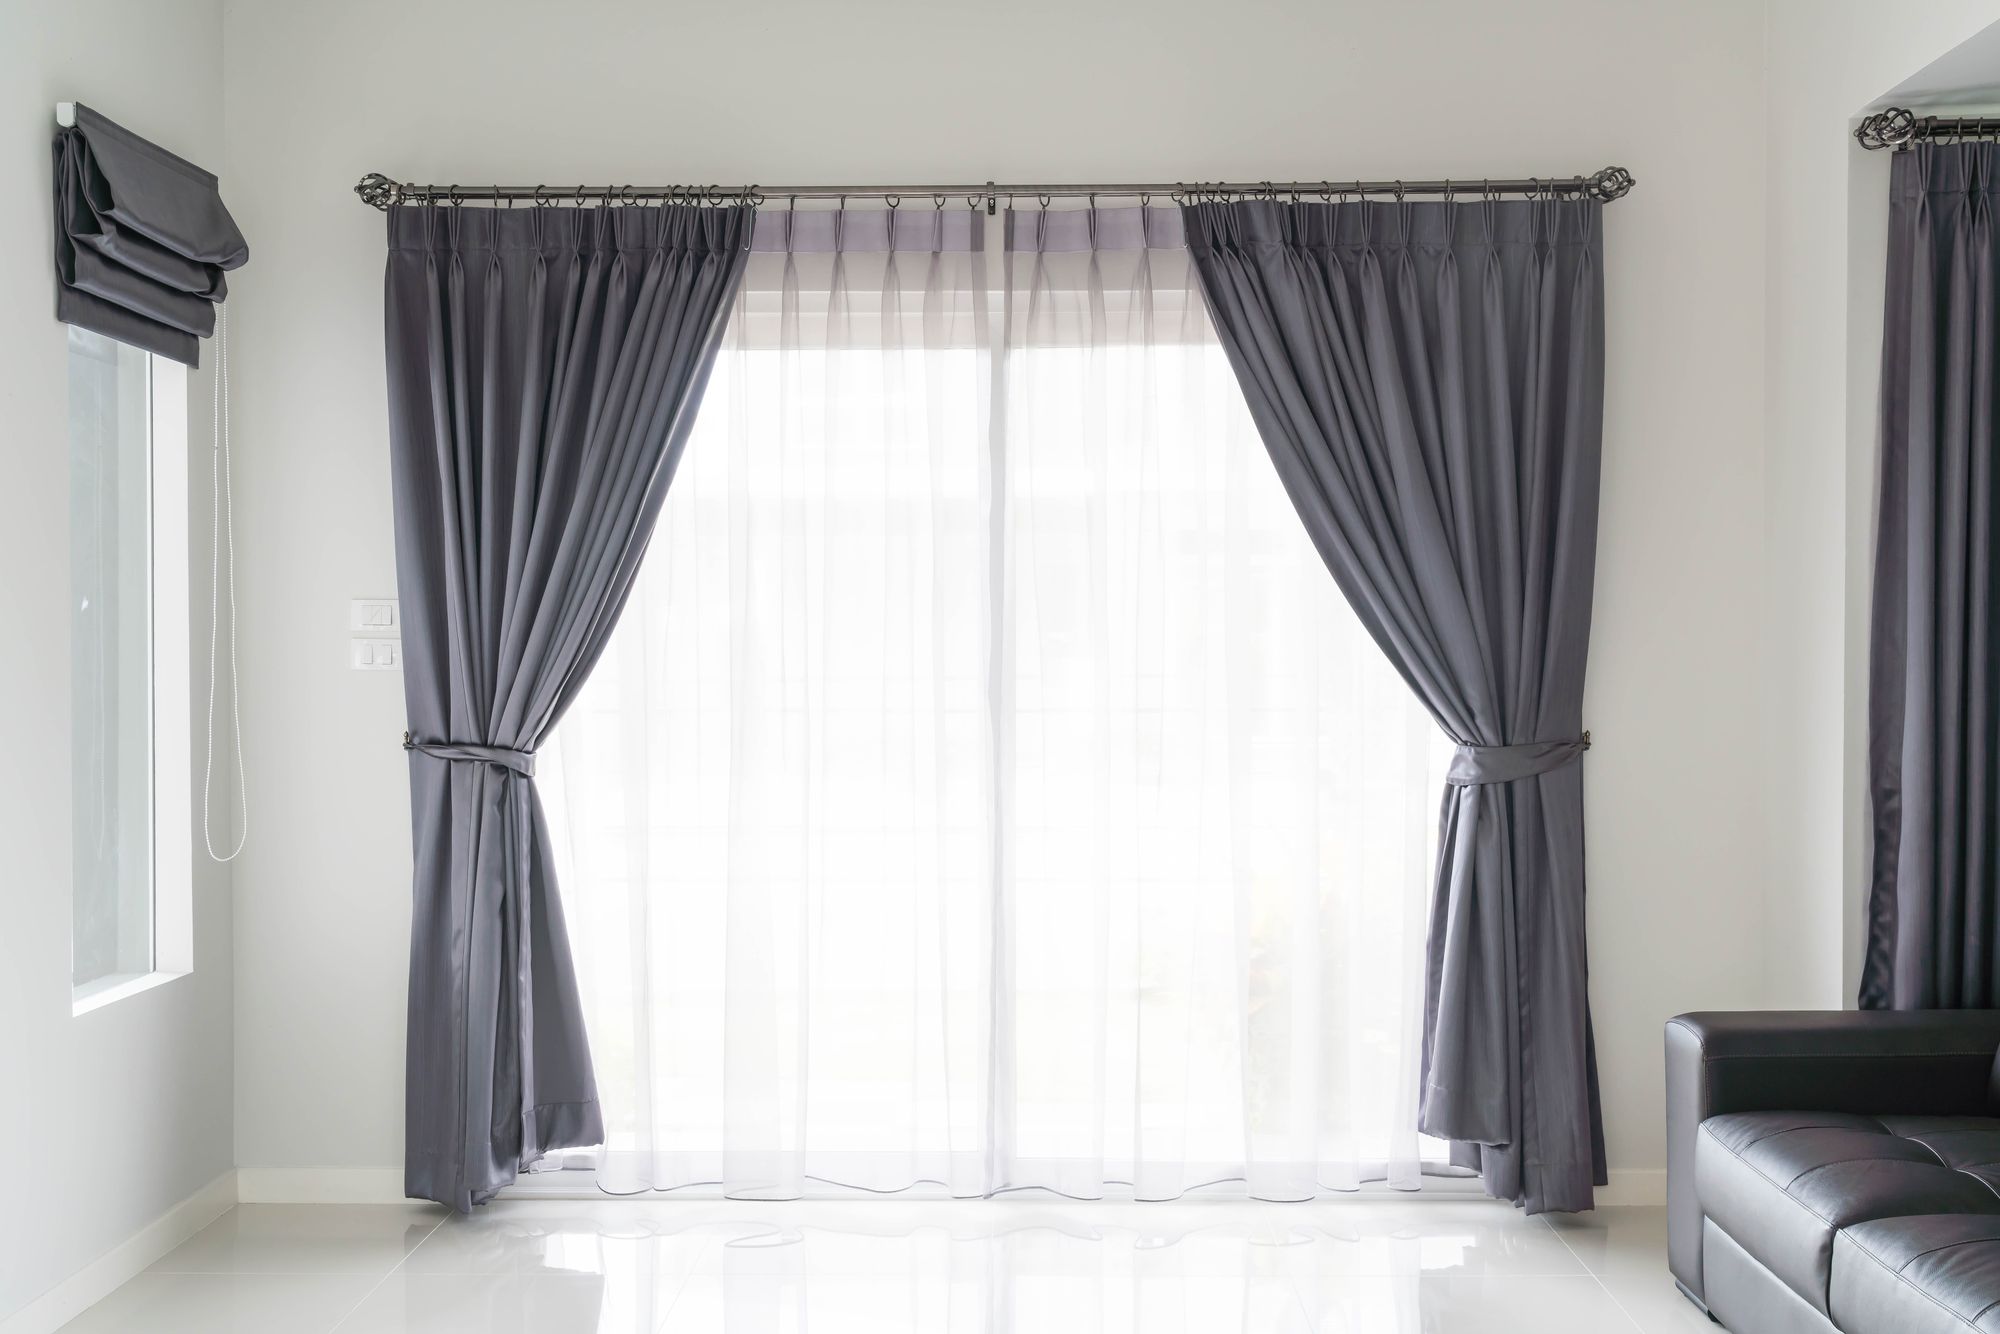 Choosing the Right Winter Window Coverings